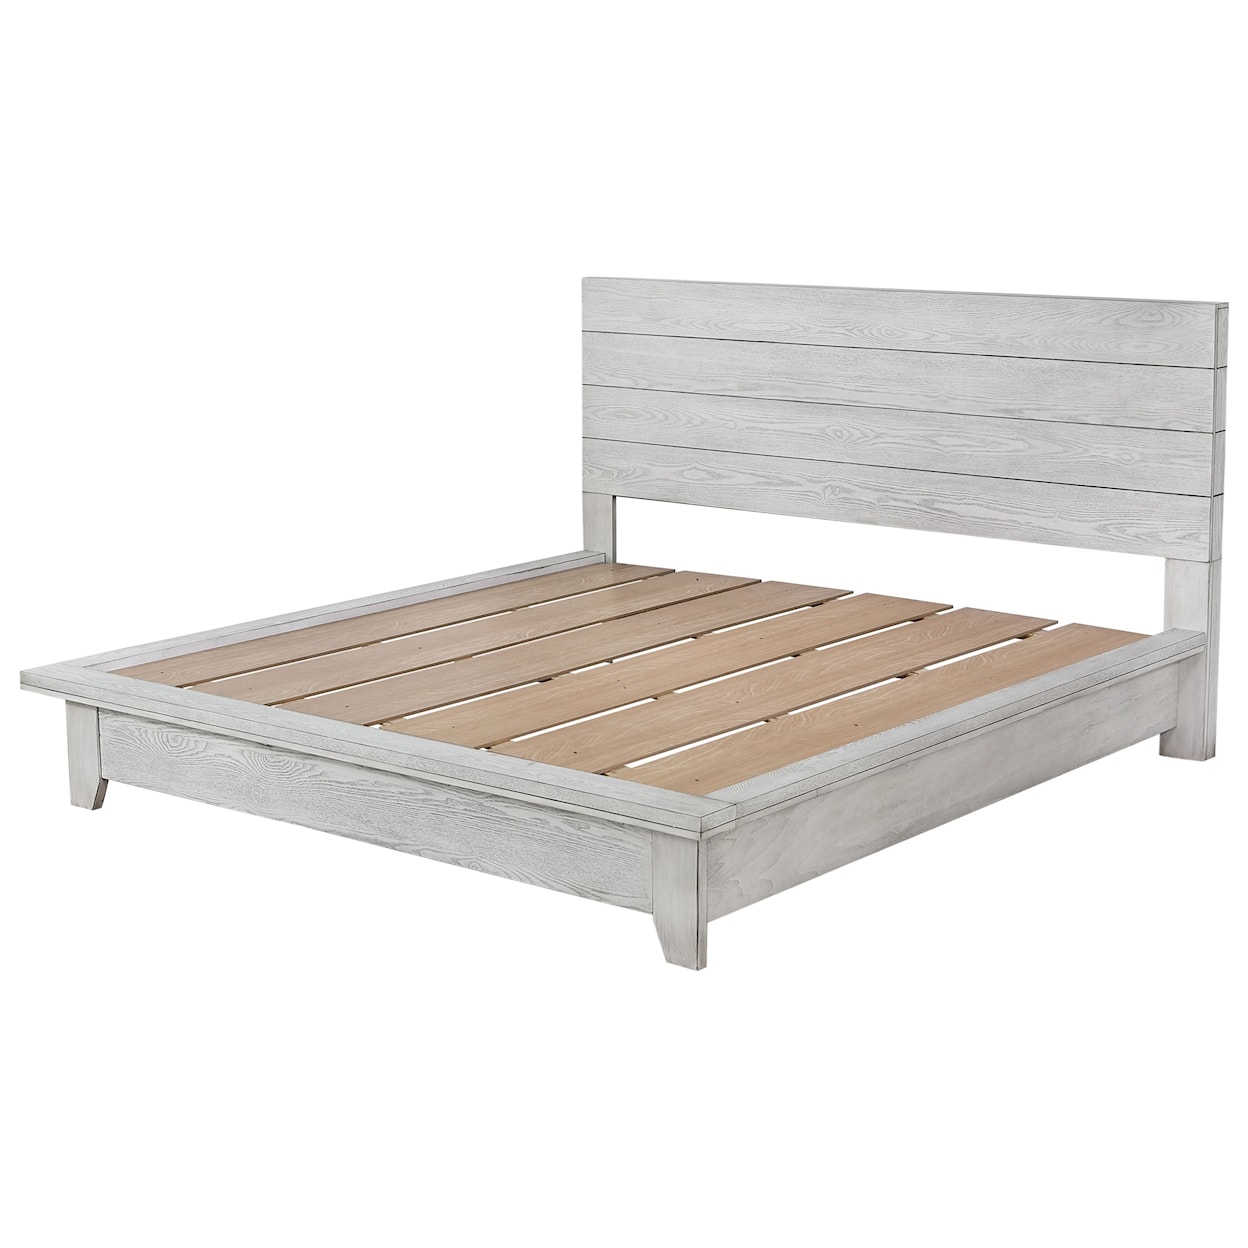 CM White Sands Queen Bed